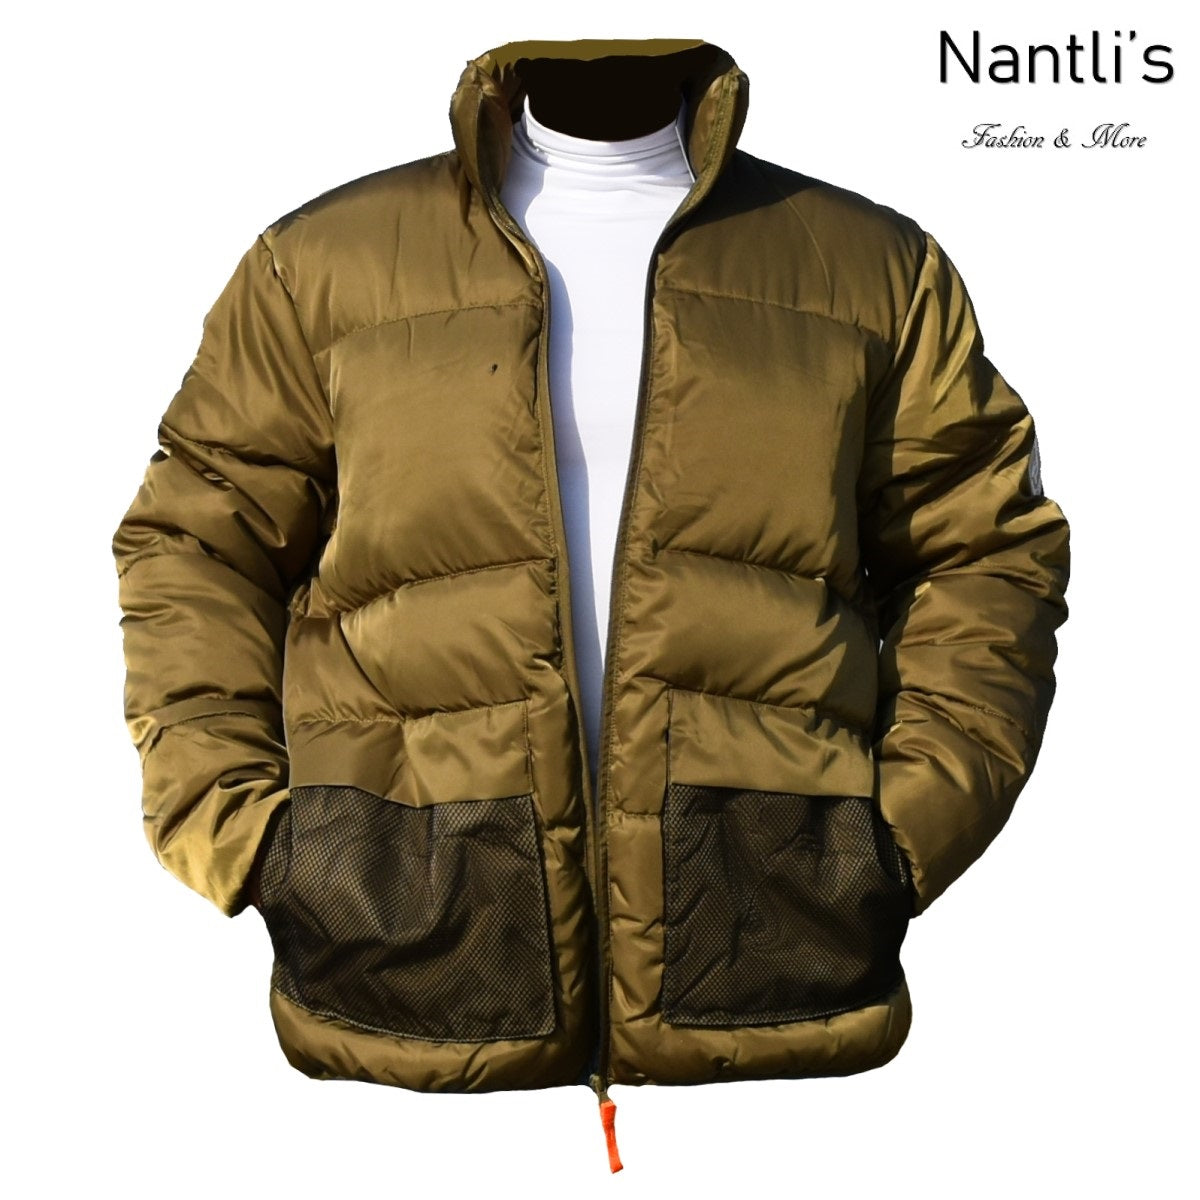 Chamarra para Hombre - TM-L412425 Jacket for Men – Nantli's - Online Store | Footwear, Clothing and